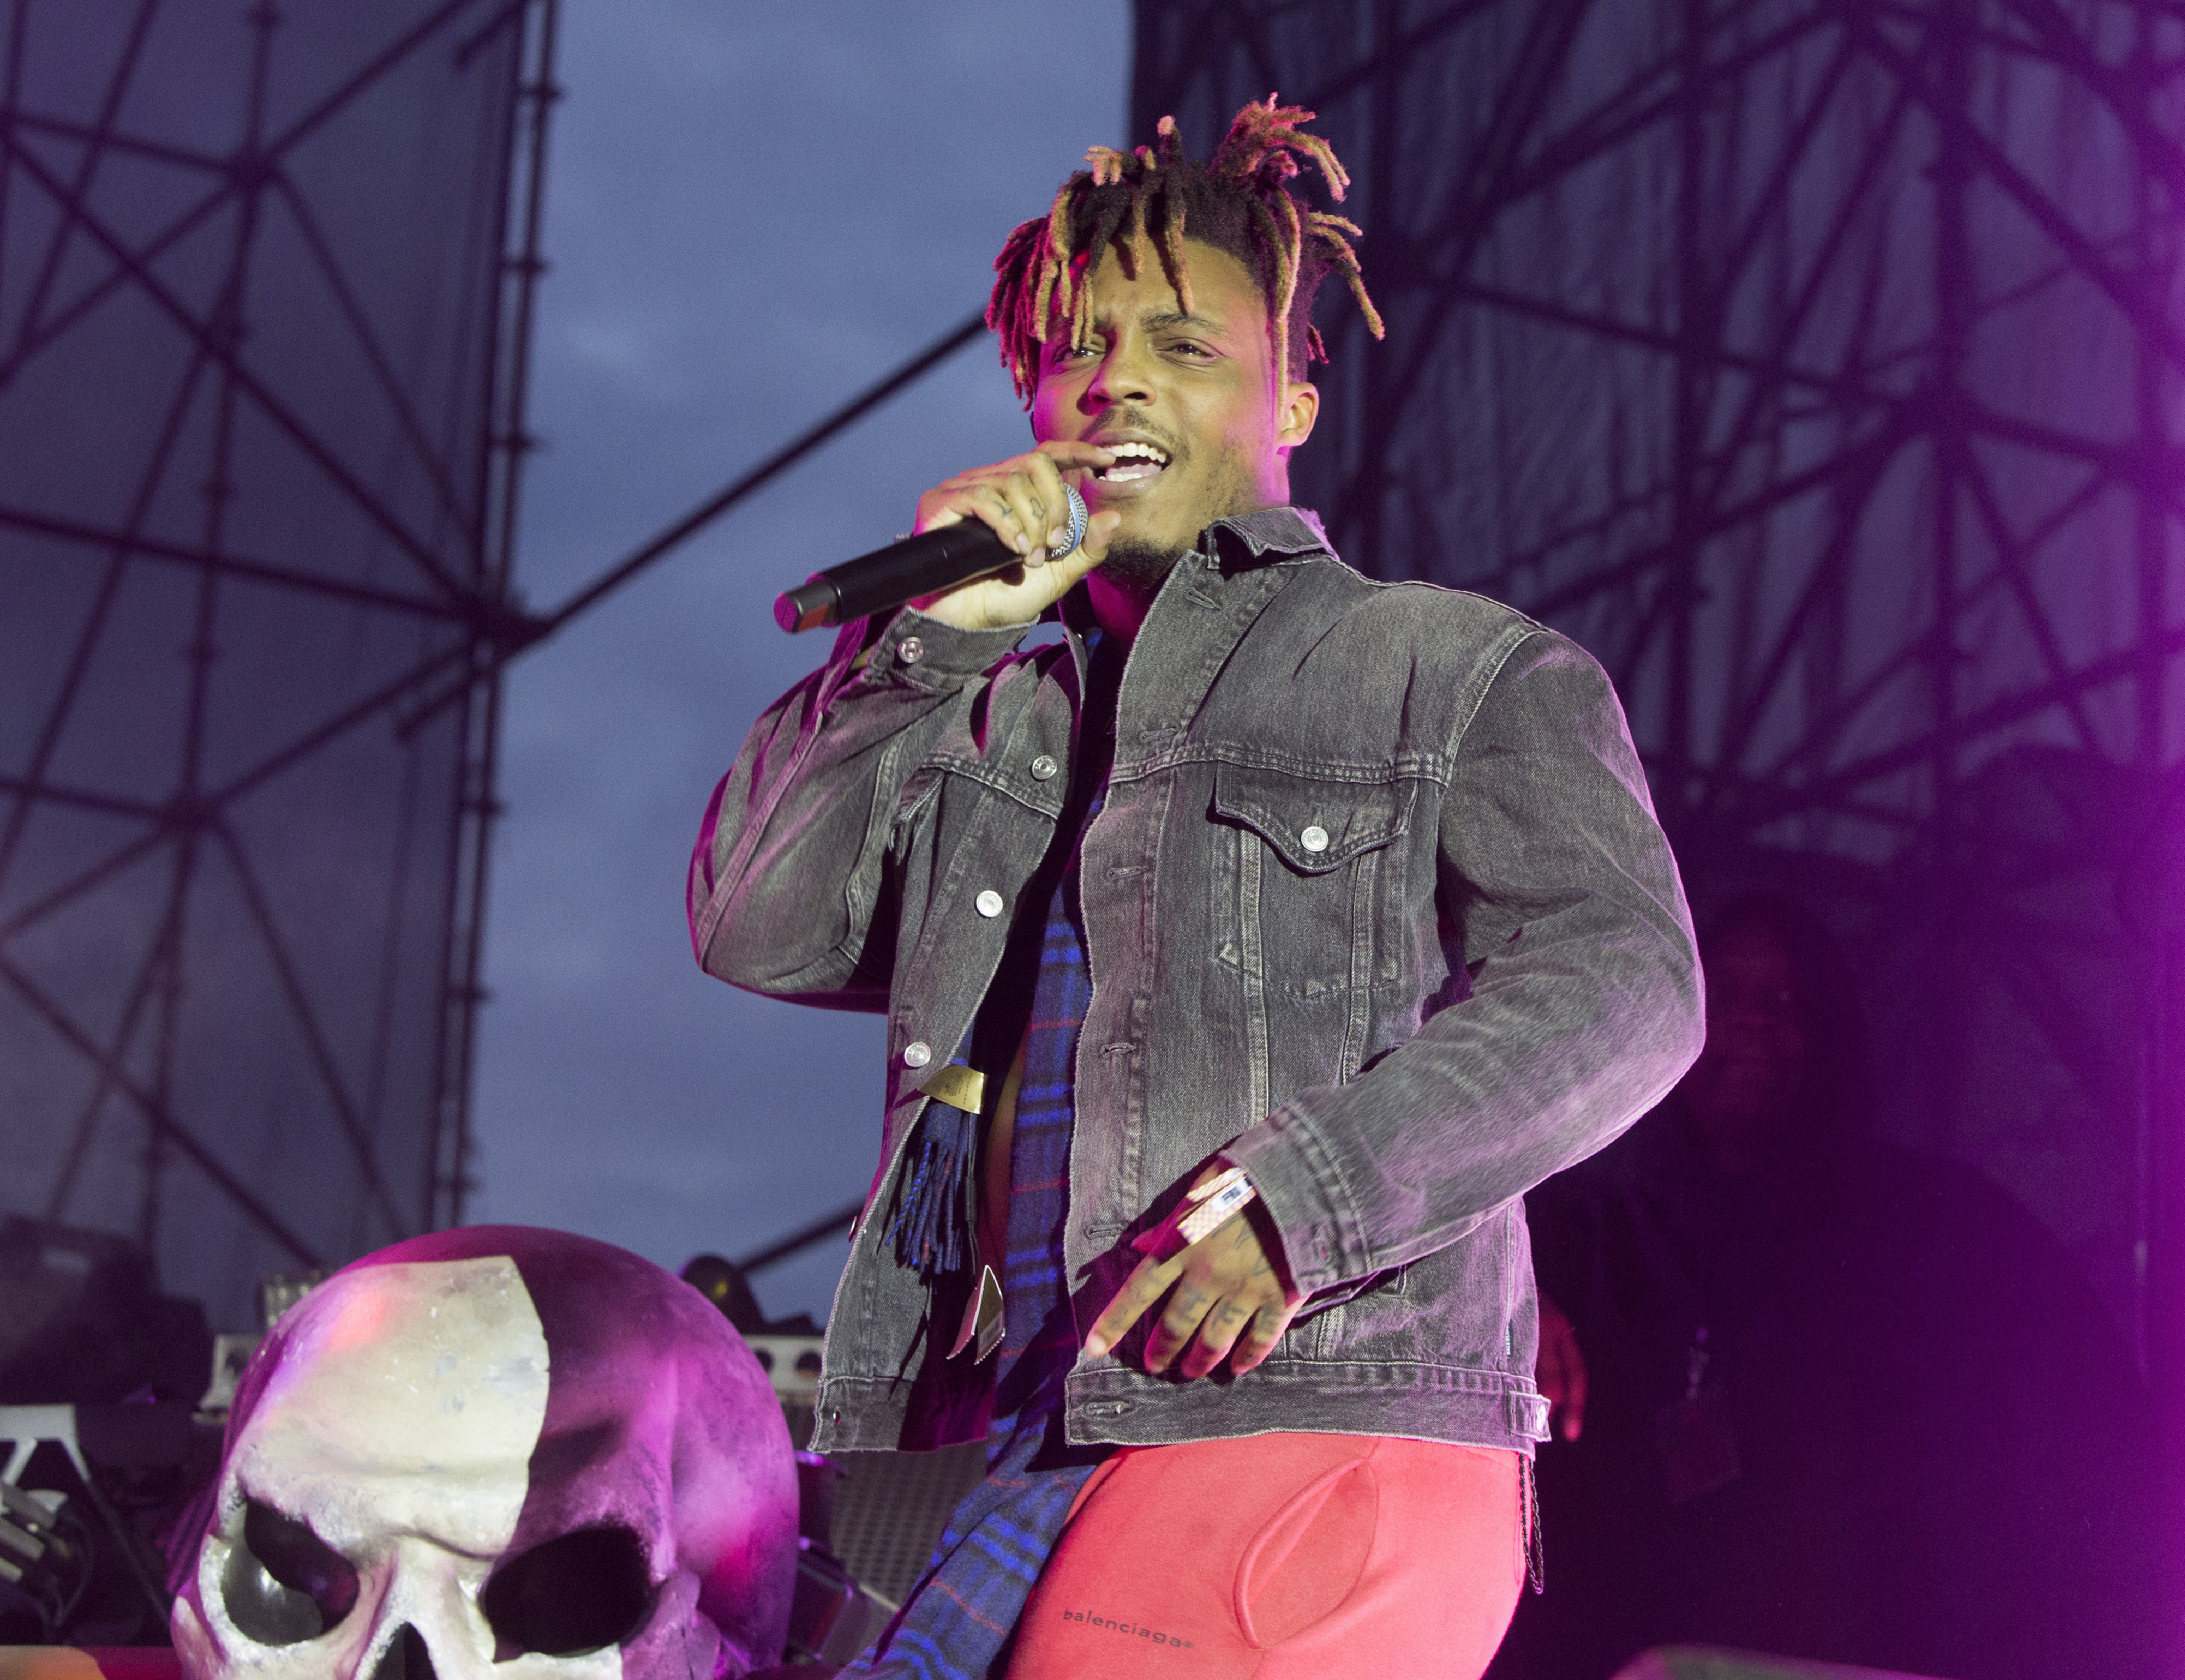 Juice WRLD – 'Legends Never Die' review: a painful reminder of the young  rapper's talent